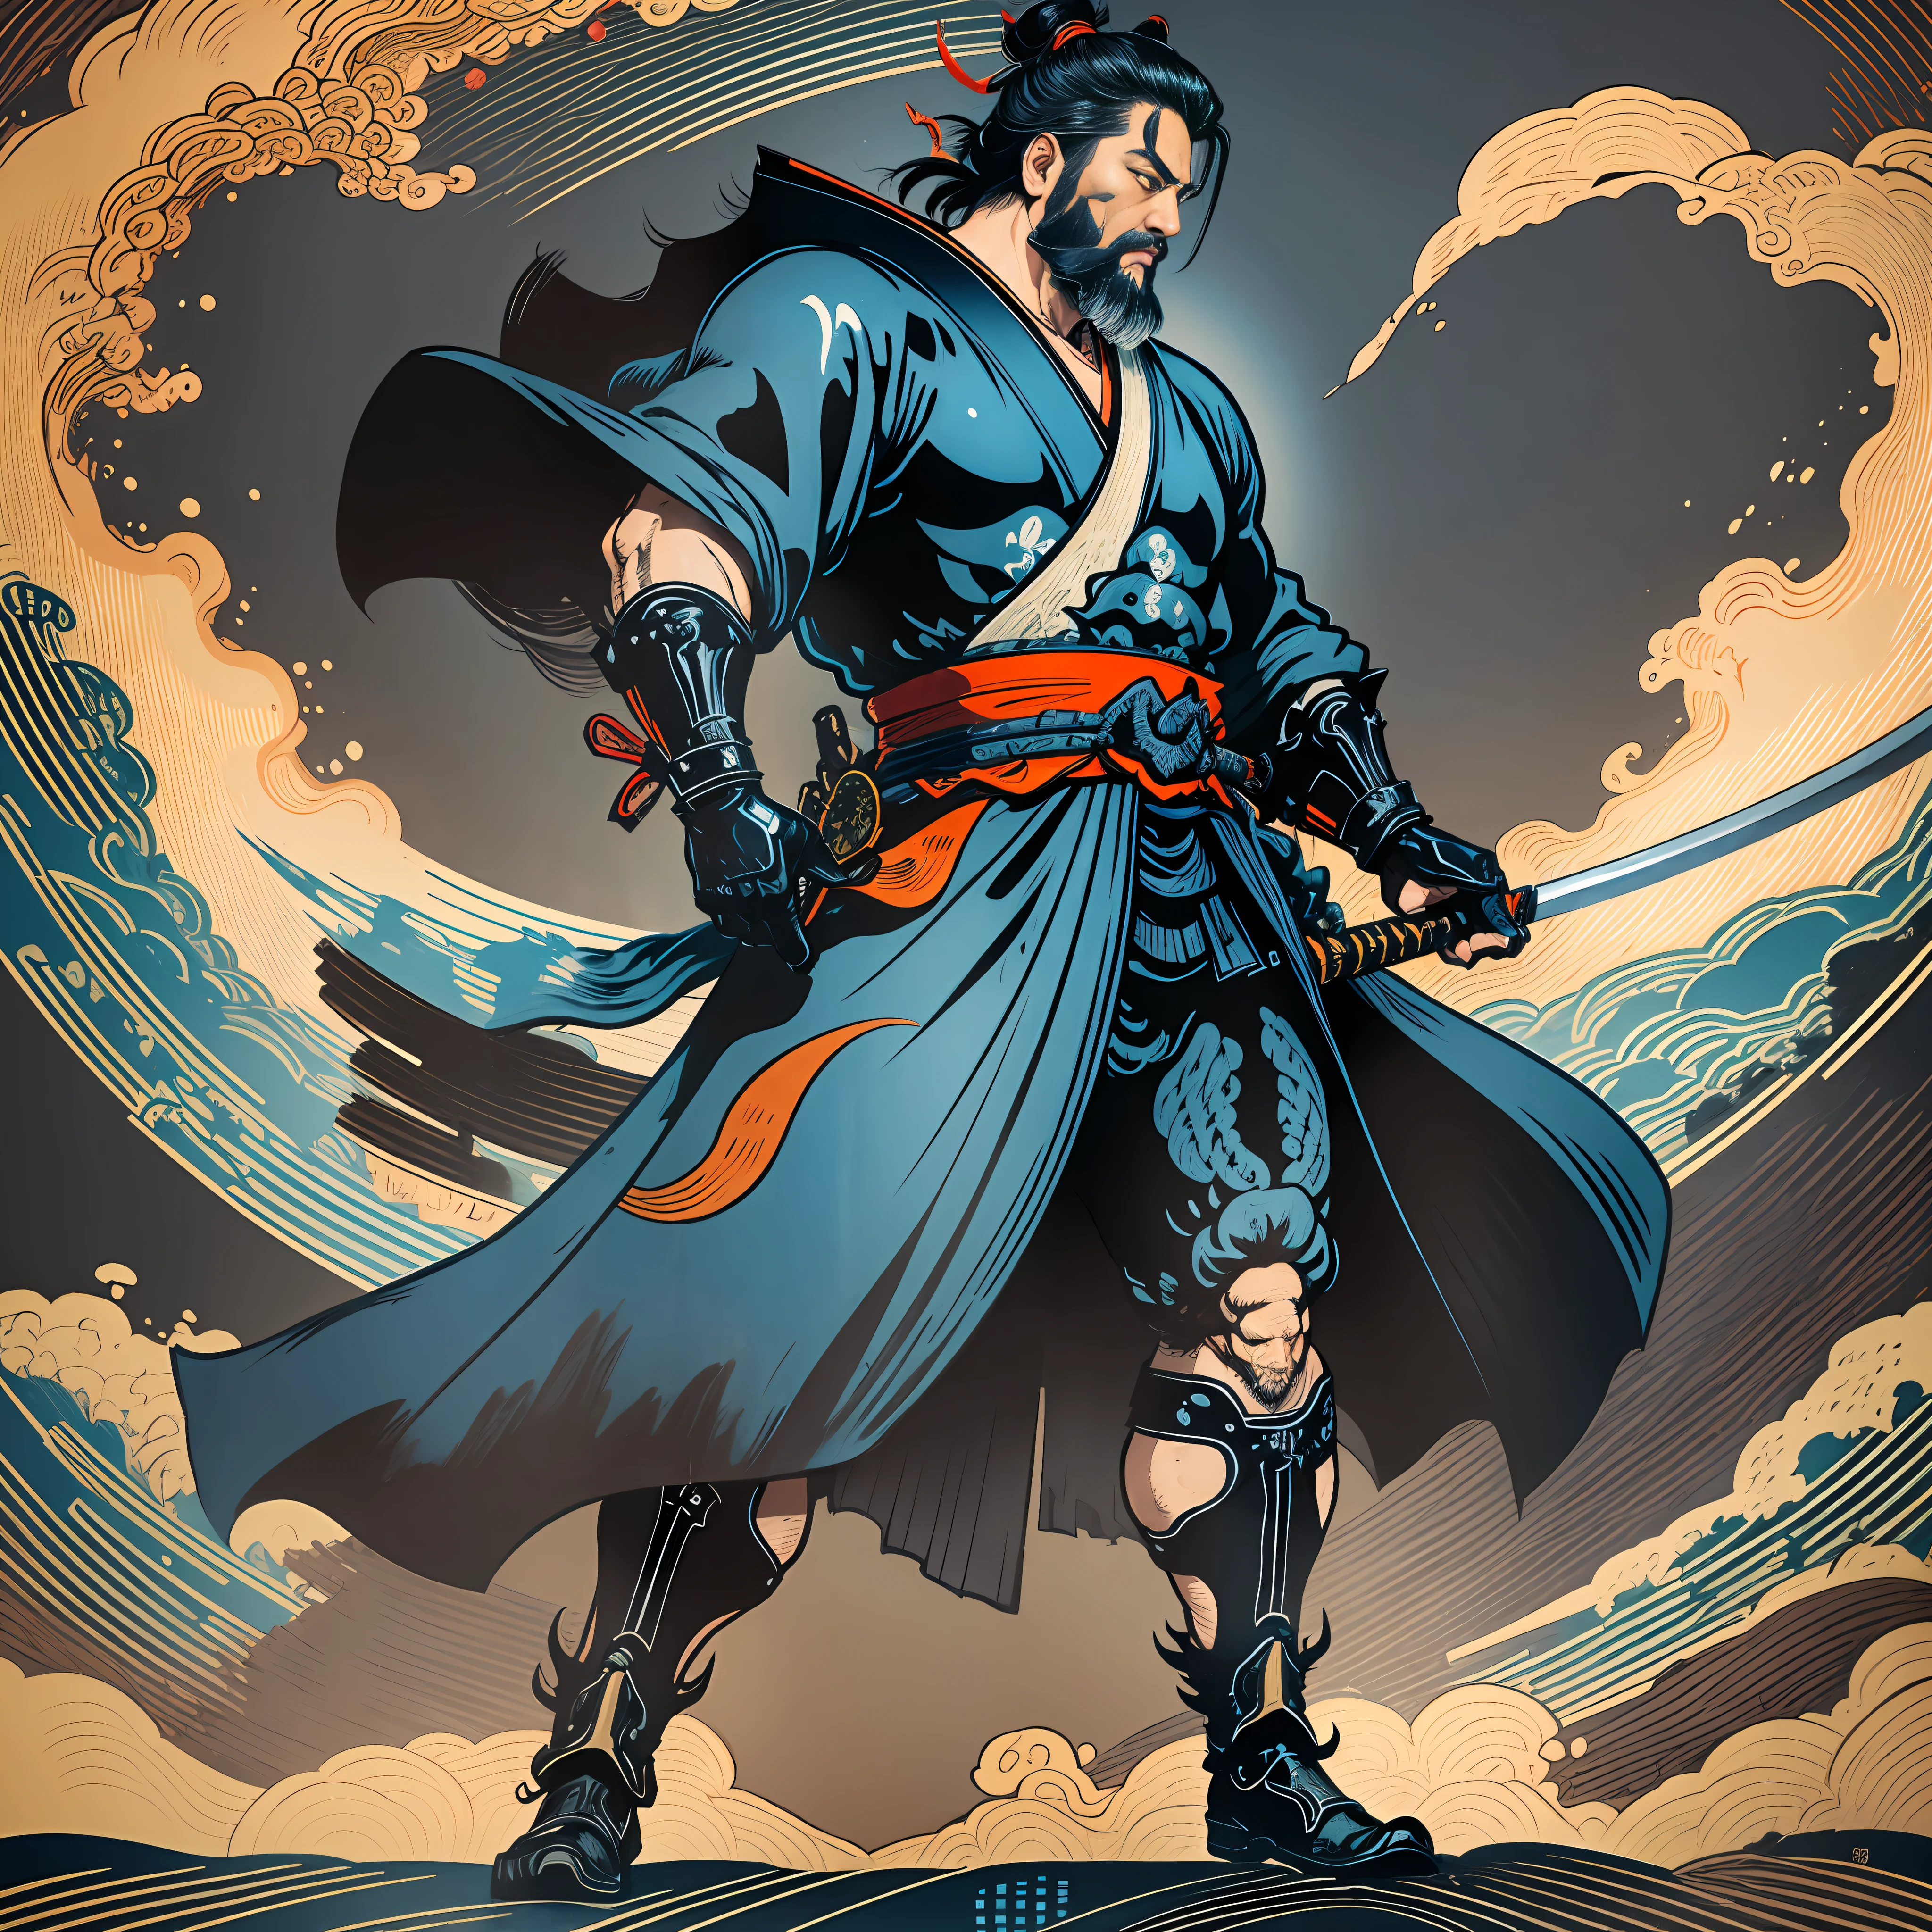 It is a full-body painting with natural colors with Katsushika Hokusai-style line drawings. The swordsman Miyamoto Musashi has a big body like a strongman. Samurai of Japan. With a dignified but manly expression of determination, he confronts evil spirits. He has black short hair and a short, trimmed beard. His upper body is covered with a jet black kimono with a glossy texture, and his hakama is knee-long. In his right hand he holds a Japan sword with a longer sword part. In the highest quality, masterpiece high resolution ukiyo-e style lightning and swirling flames. Among them, Miyamoto Musashi is standing with his back straight, facing the front.